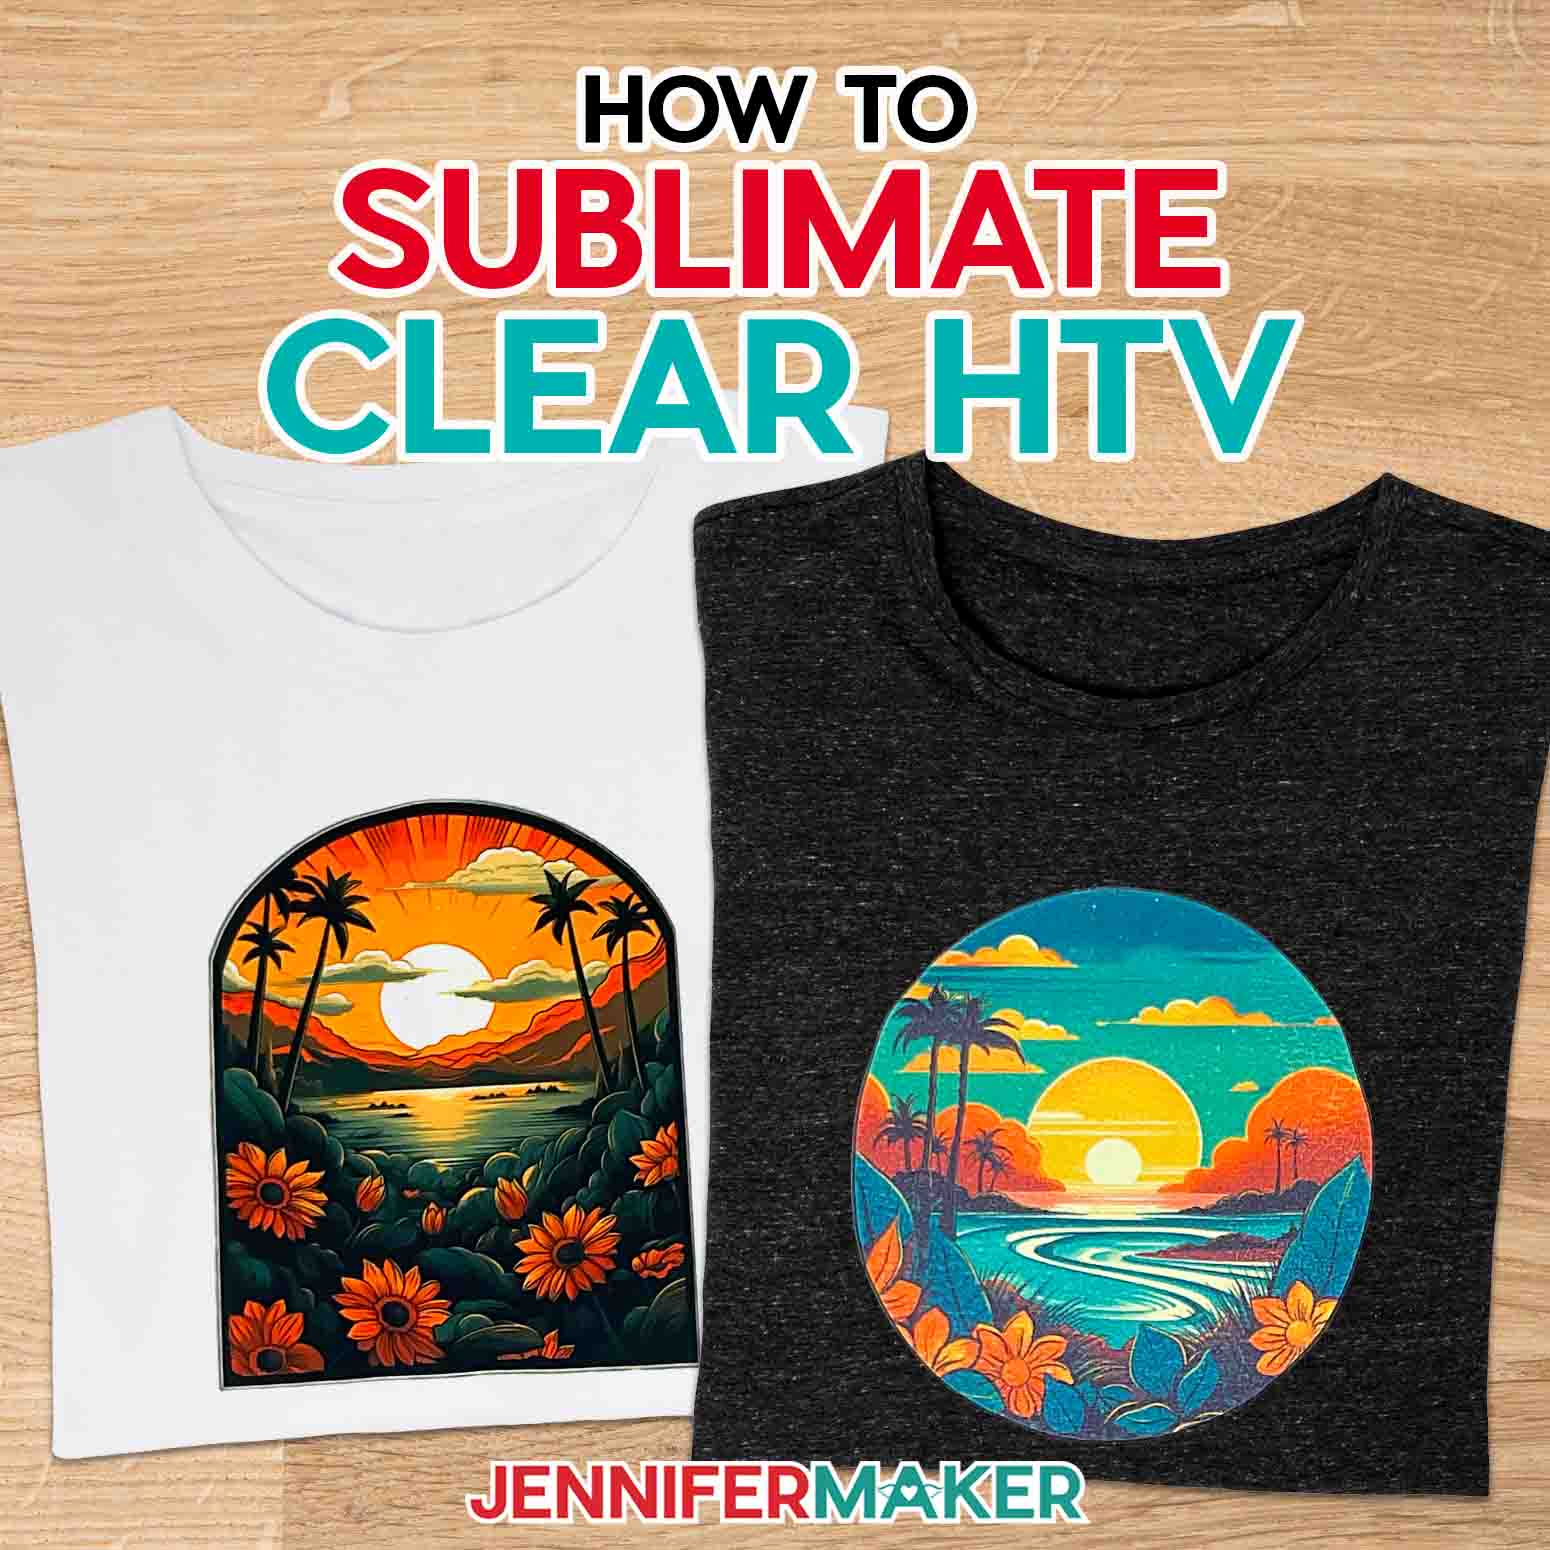 How to Sublimate Clear HTV on Dark AND Cotton Shirts!